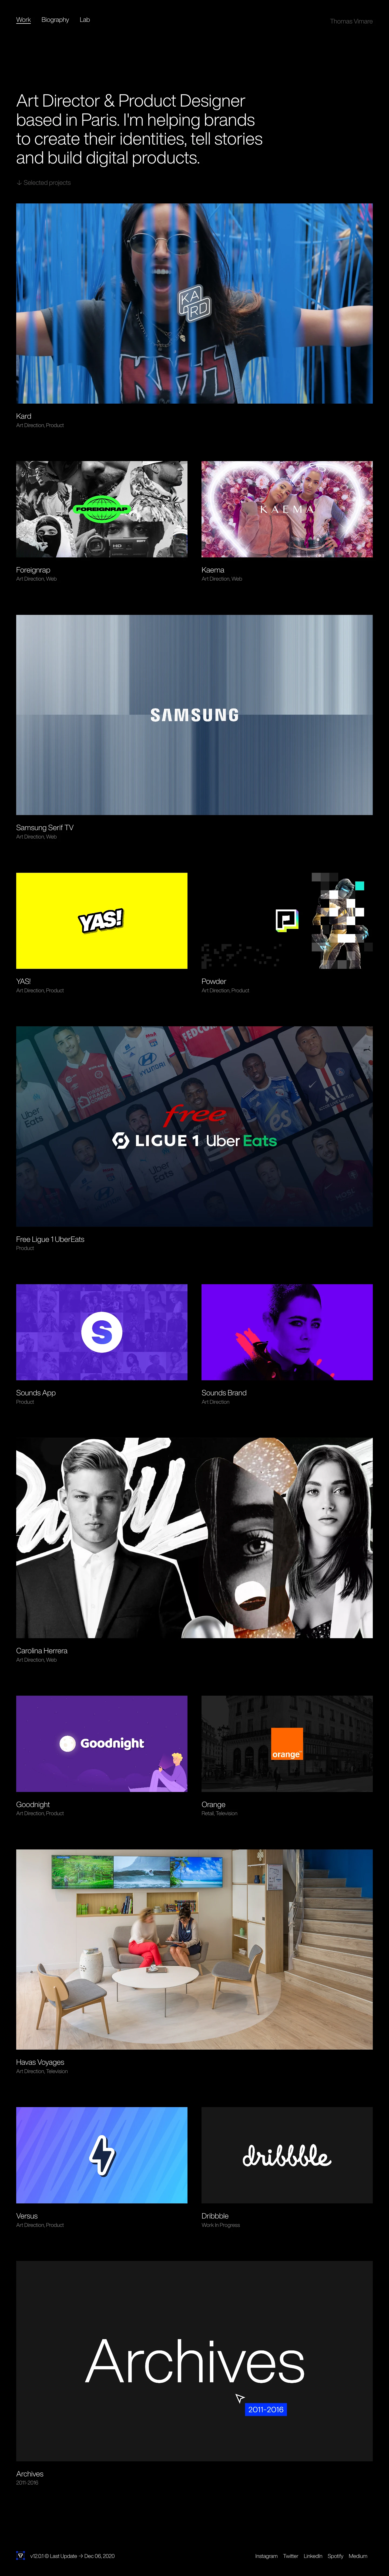 Thomas Vimare Landing Page Example: Freelance Art Director & Product Designer based in Paris. I'm helping brands to create their identities, tell stories and build digital products.